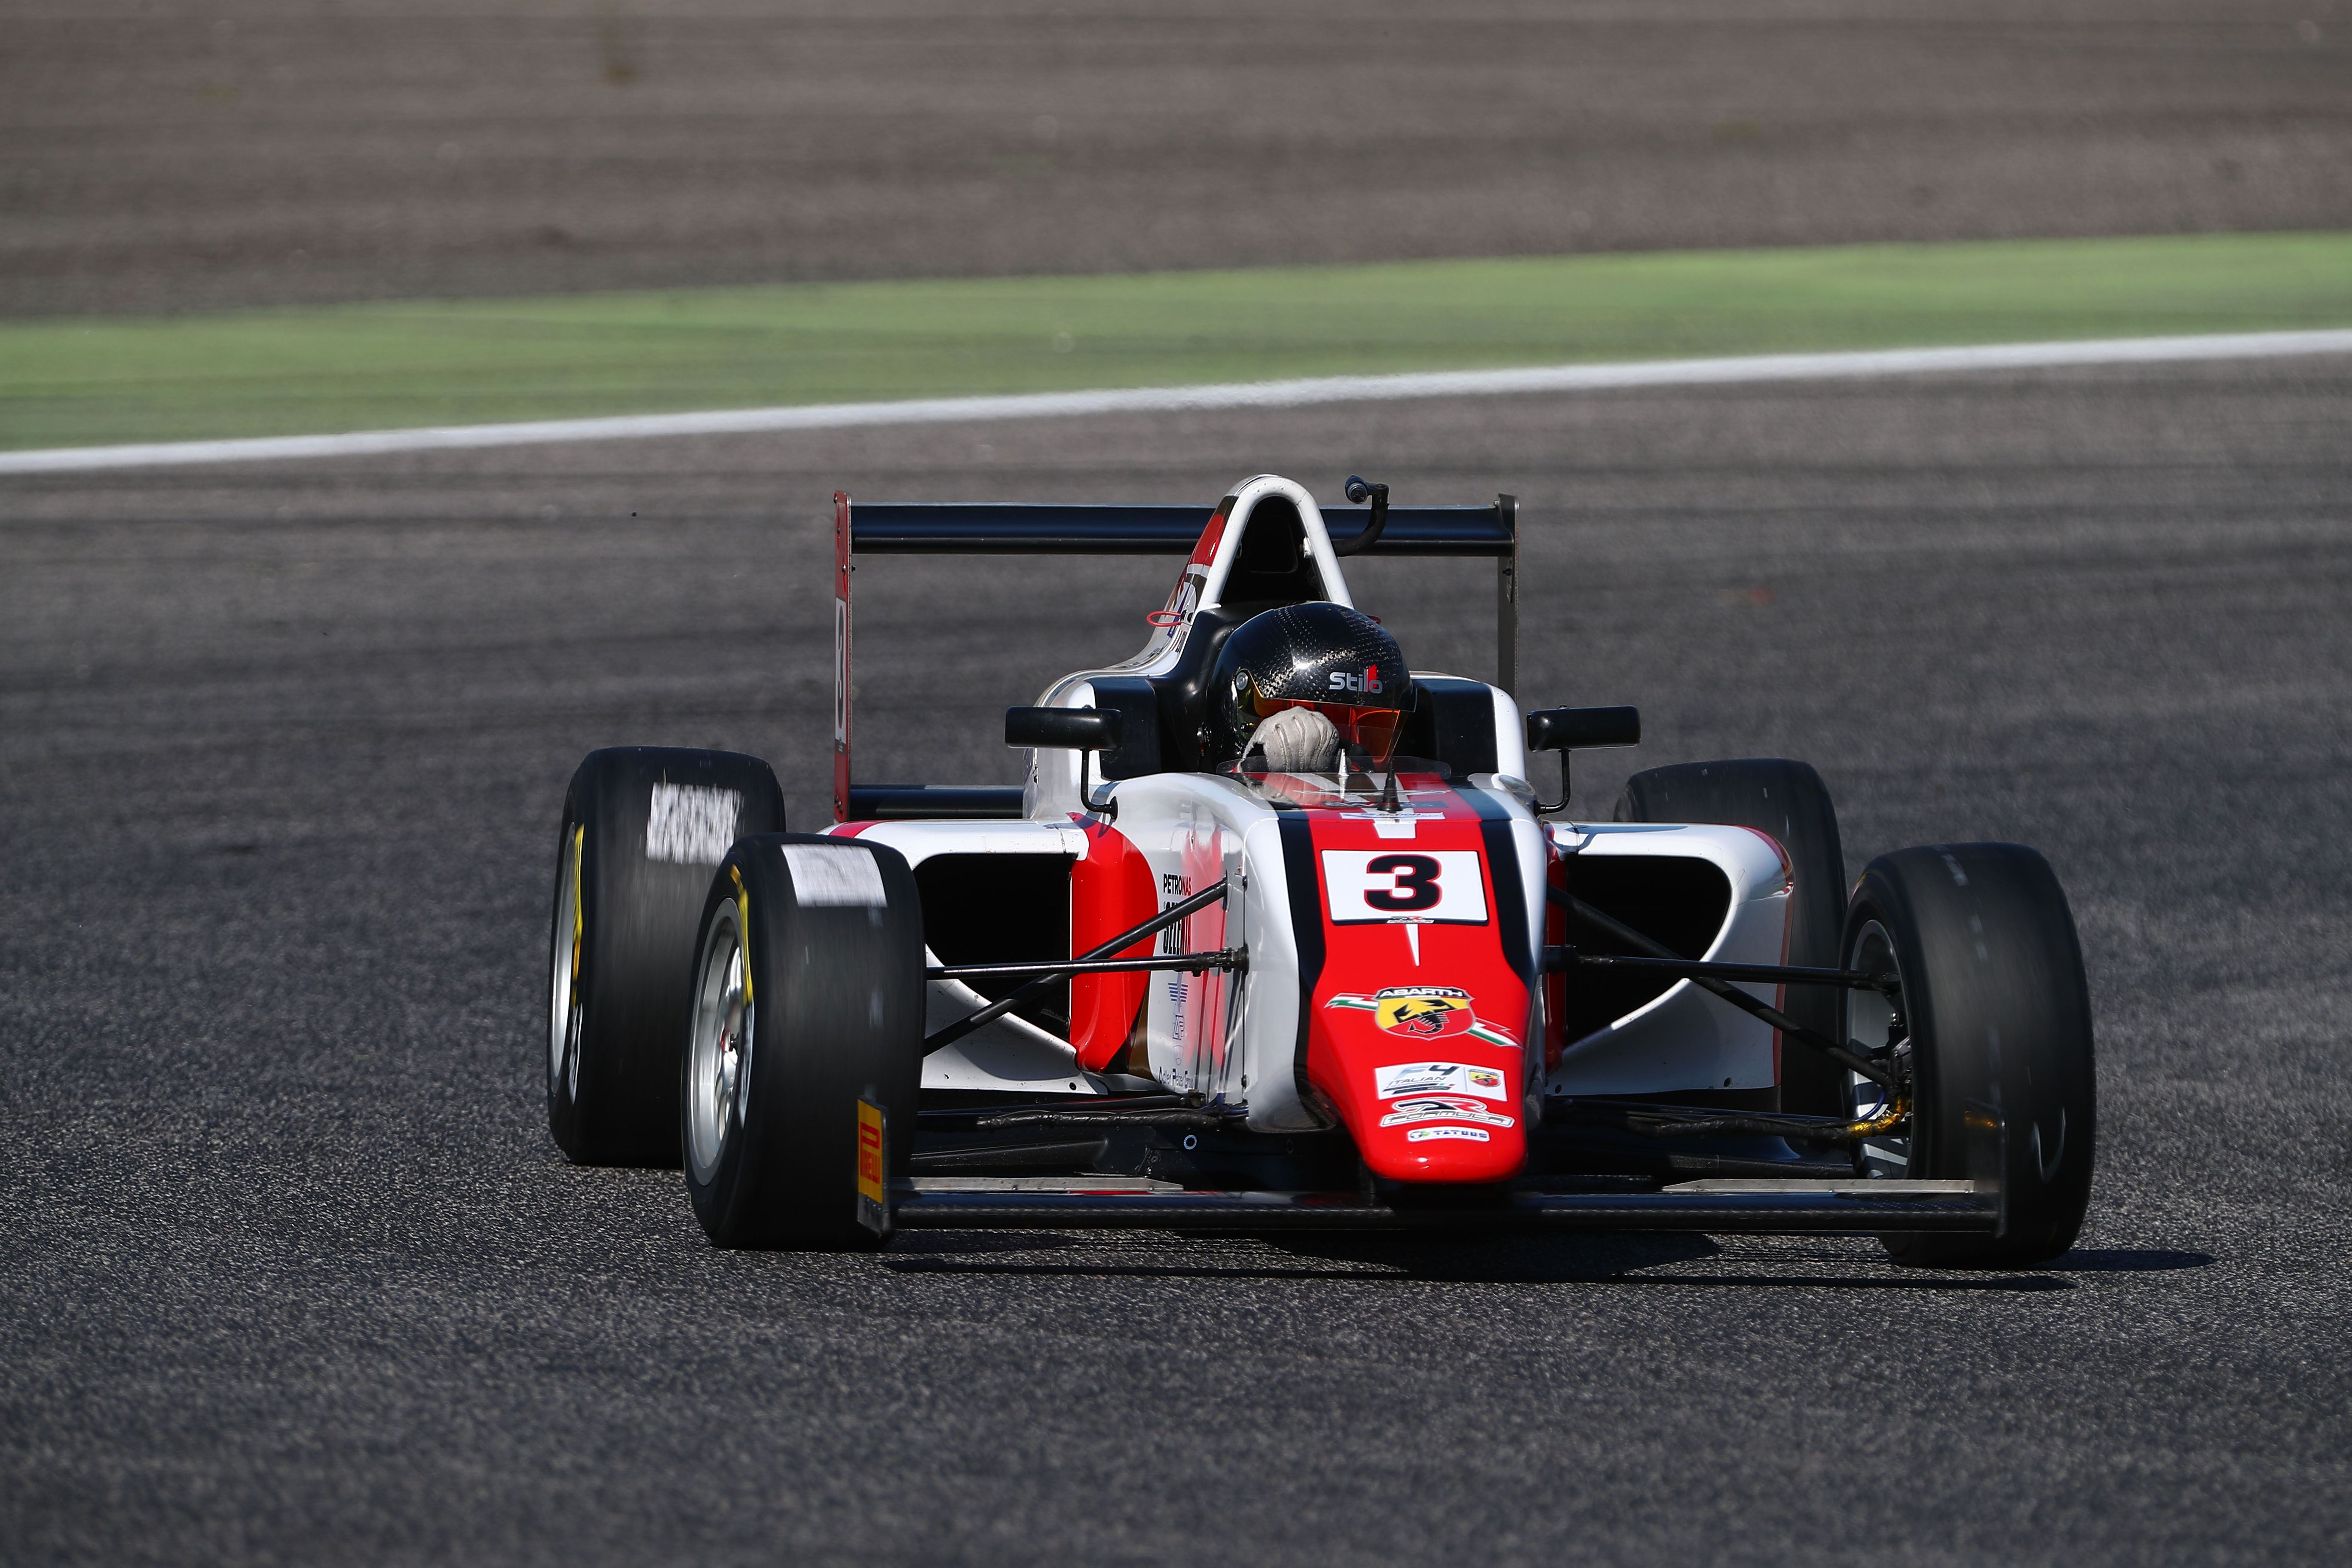 Weekend of experience for DR Formula at Adria